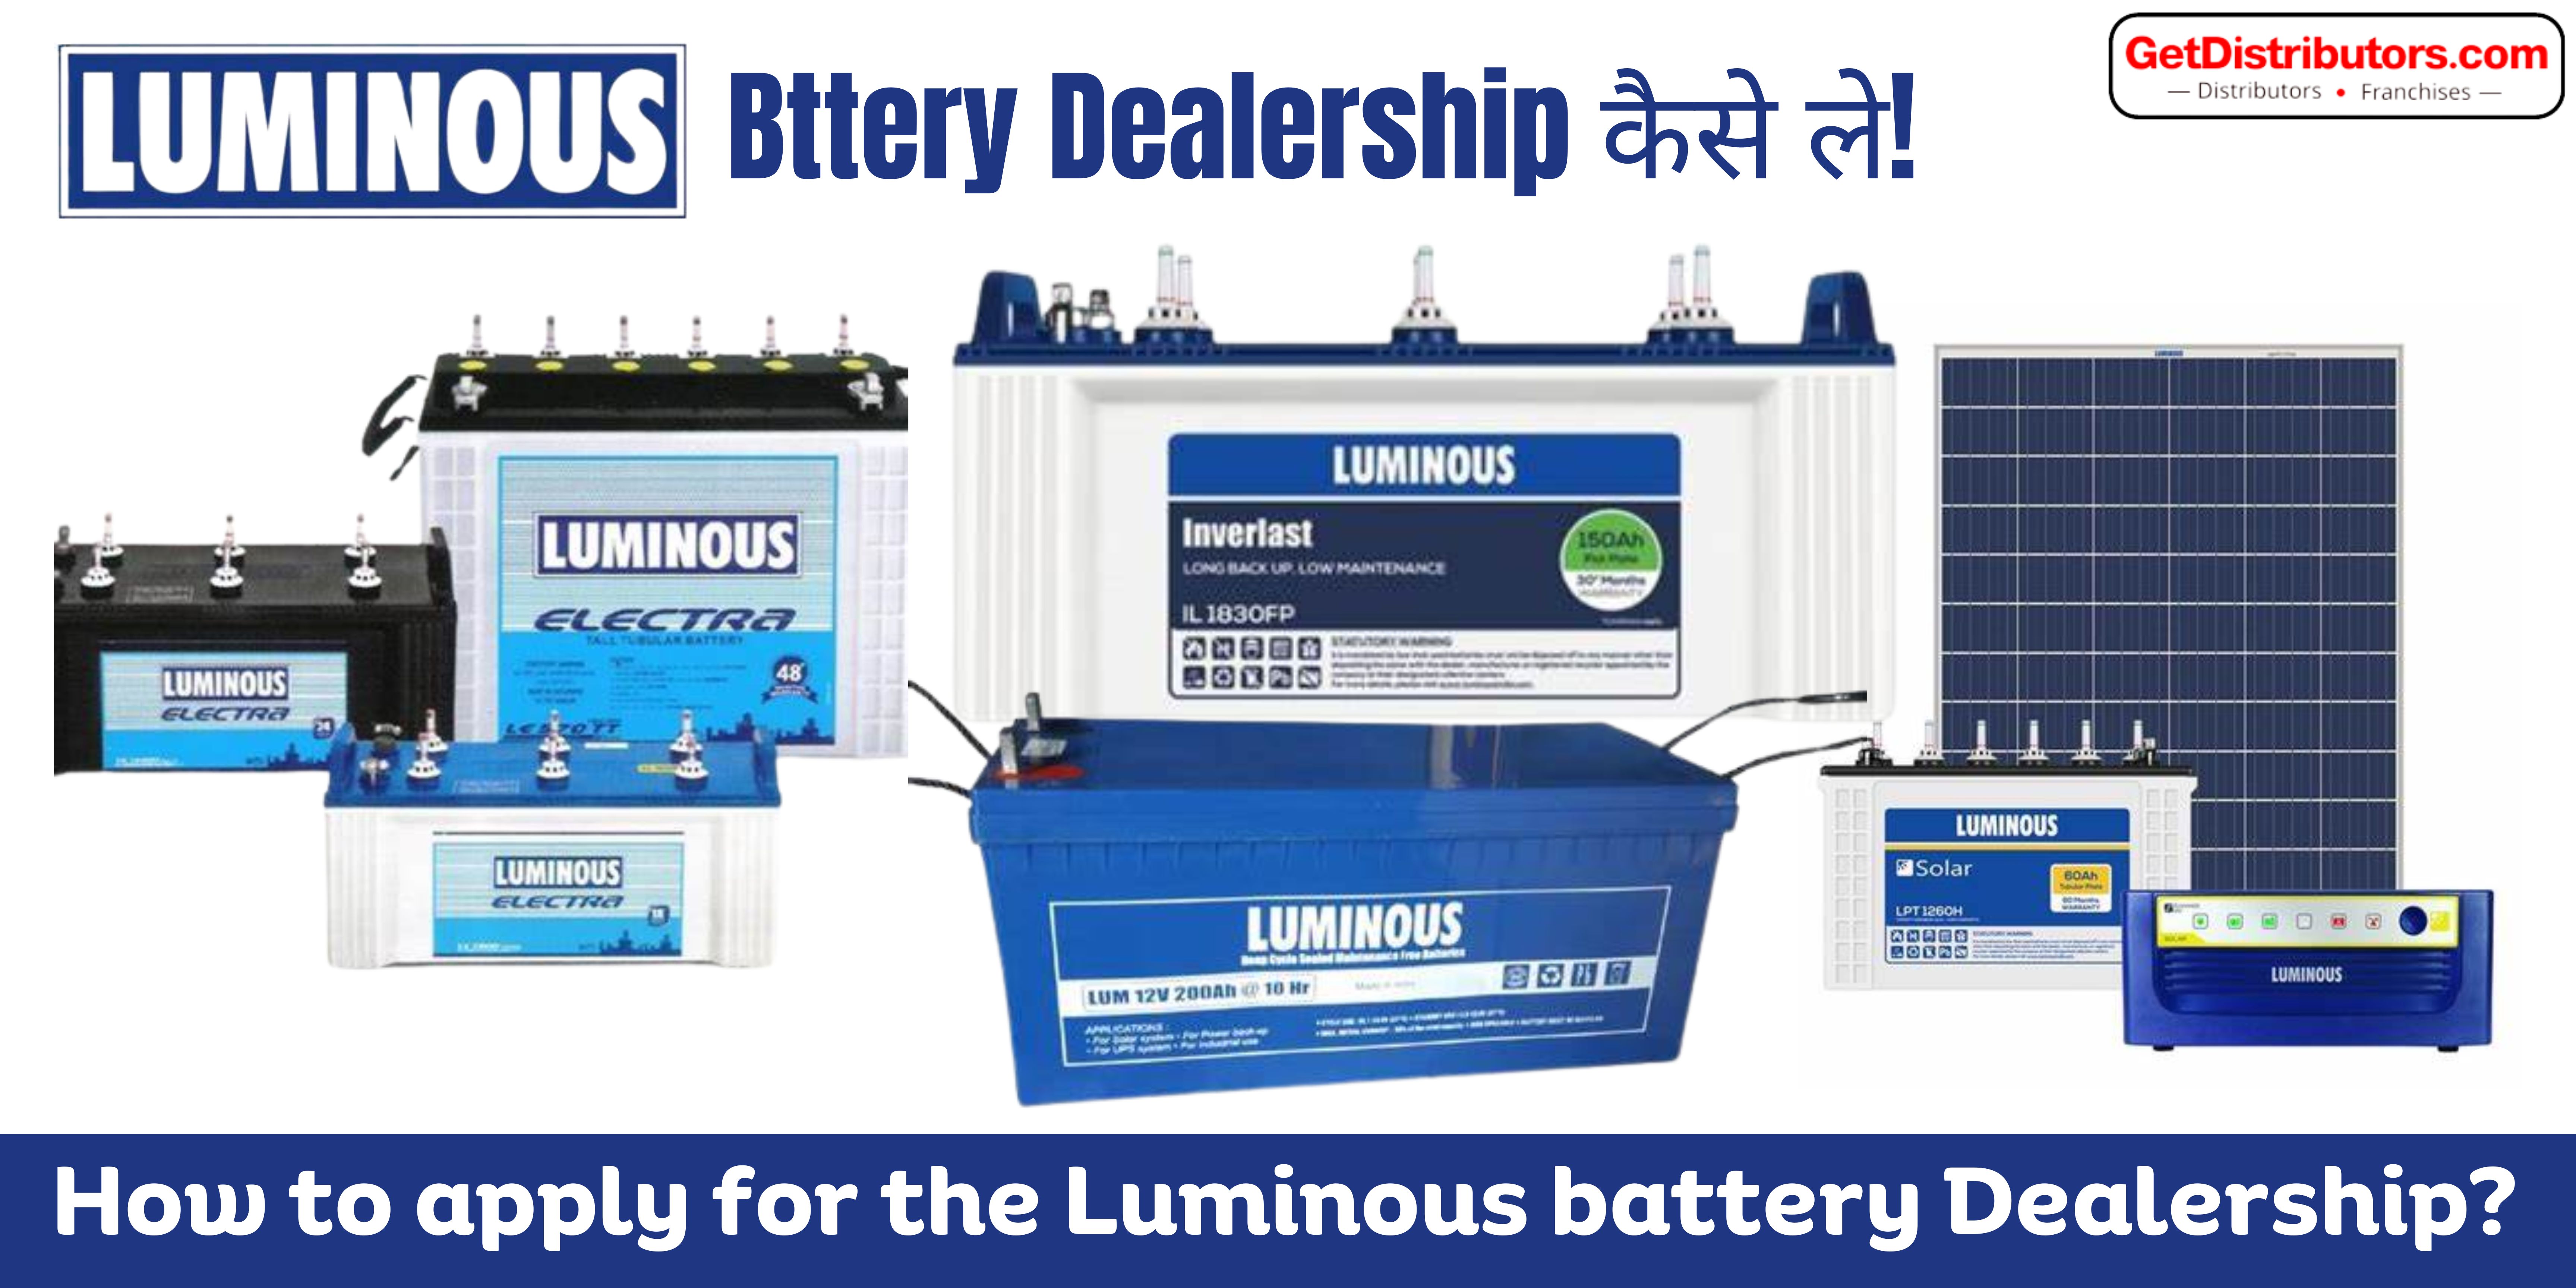 How to apply for the Luminous battery Dealership?